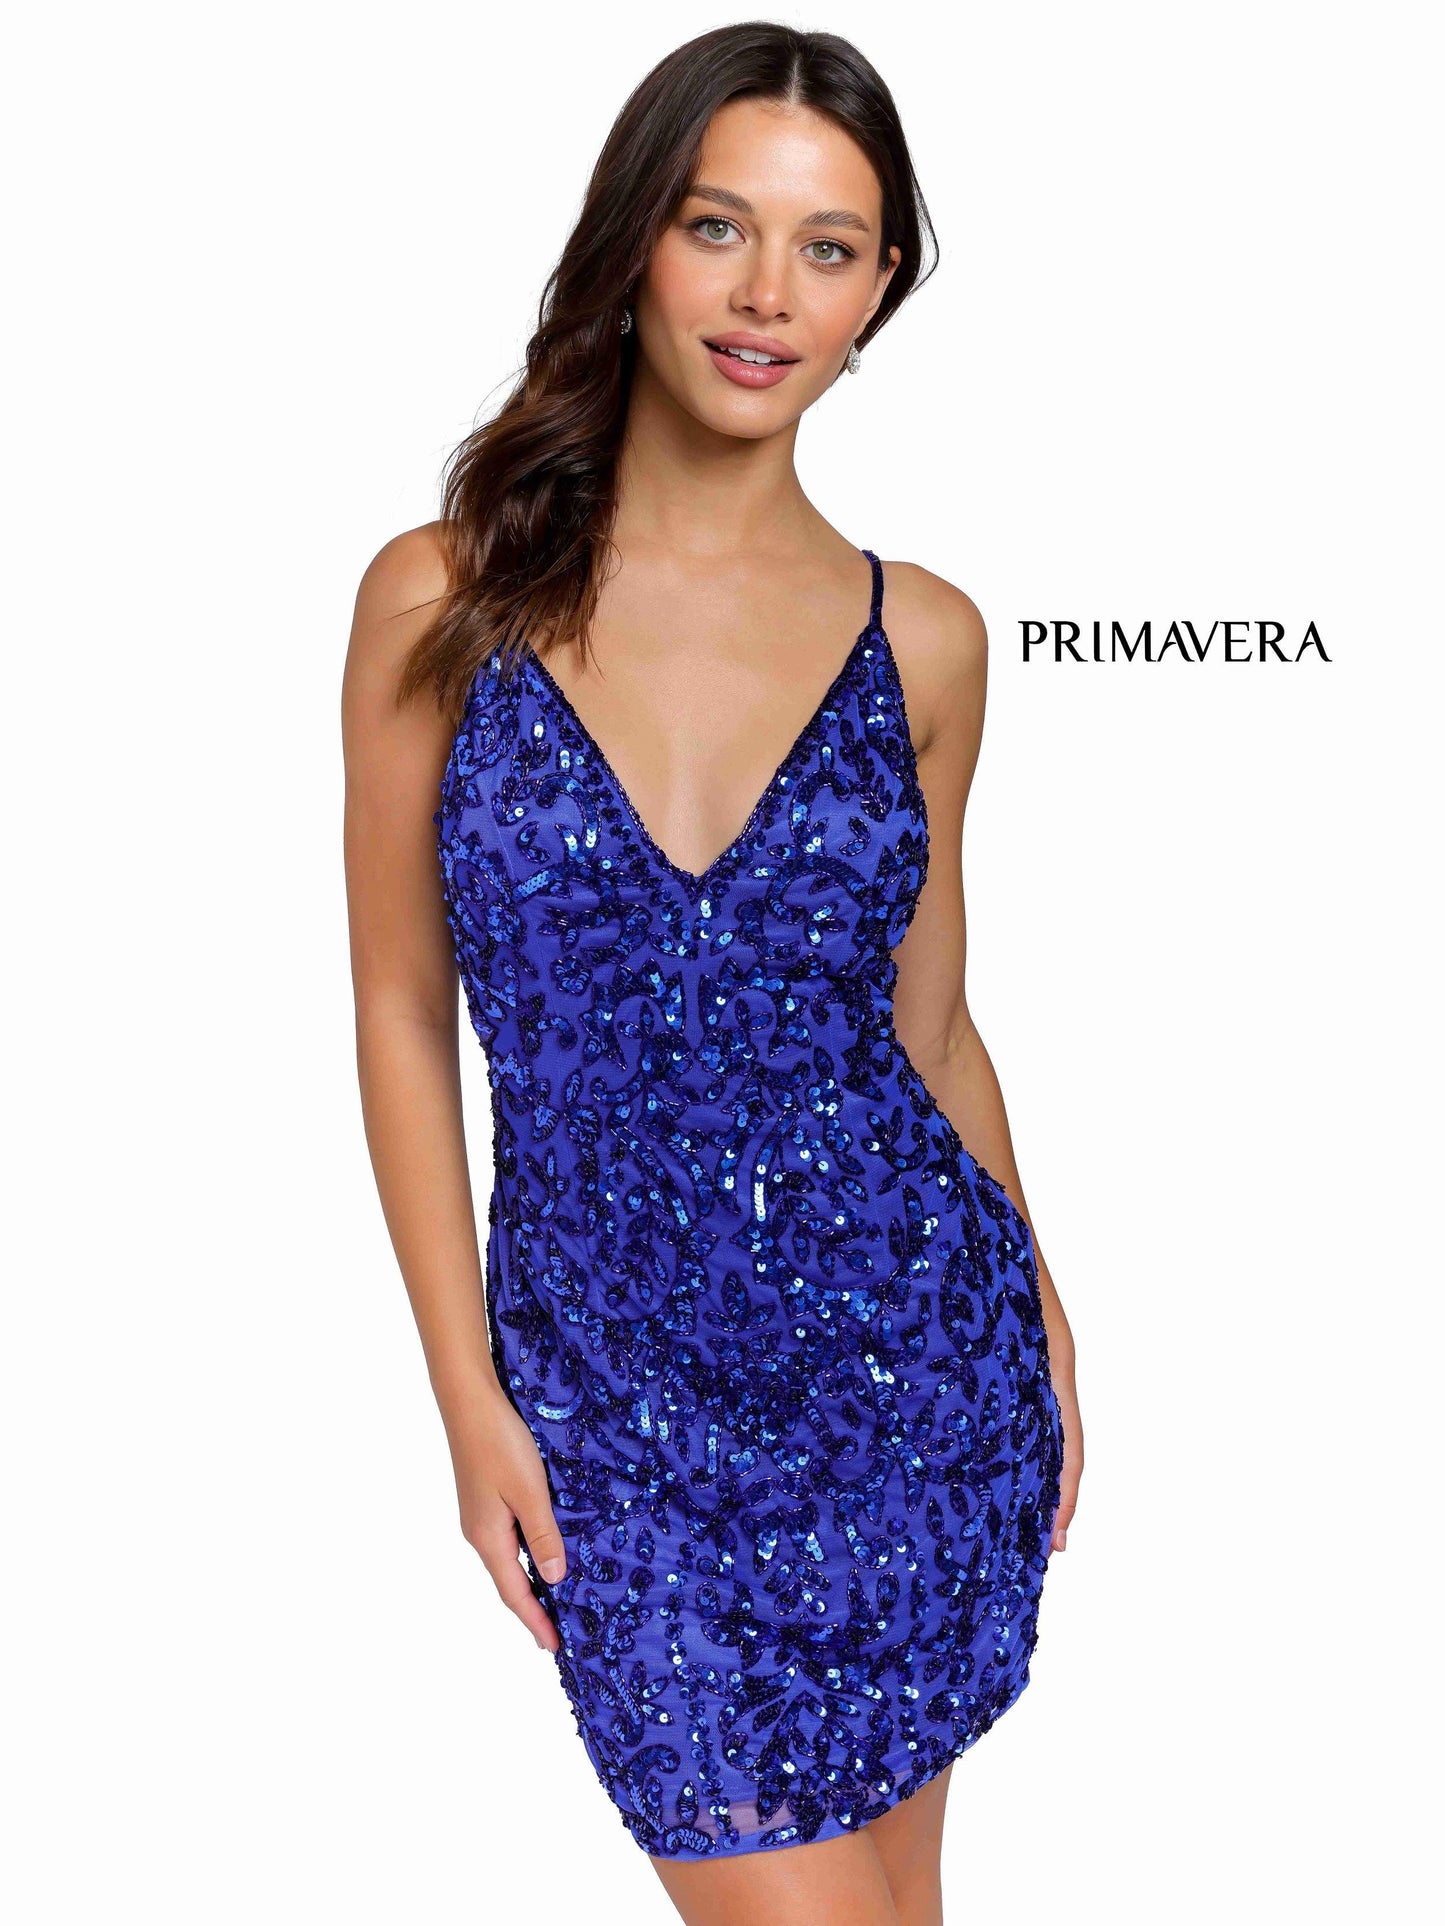 Primavera Couture Prom Short Beaded Dress 3813 - The Dress Outlet